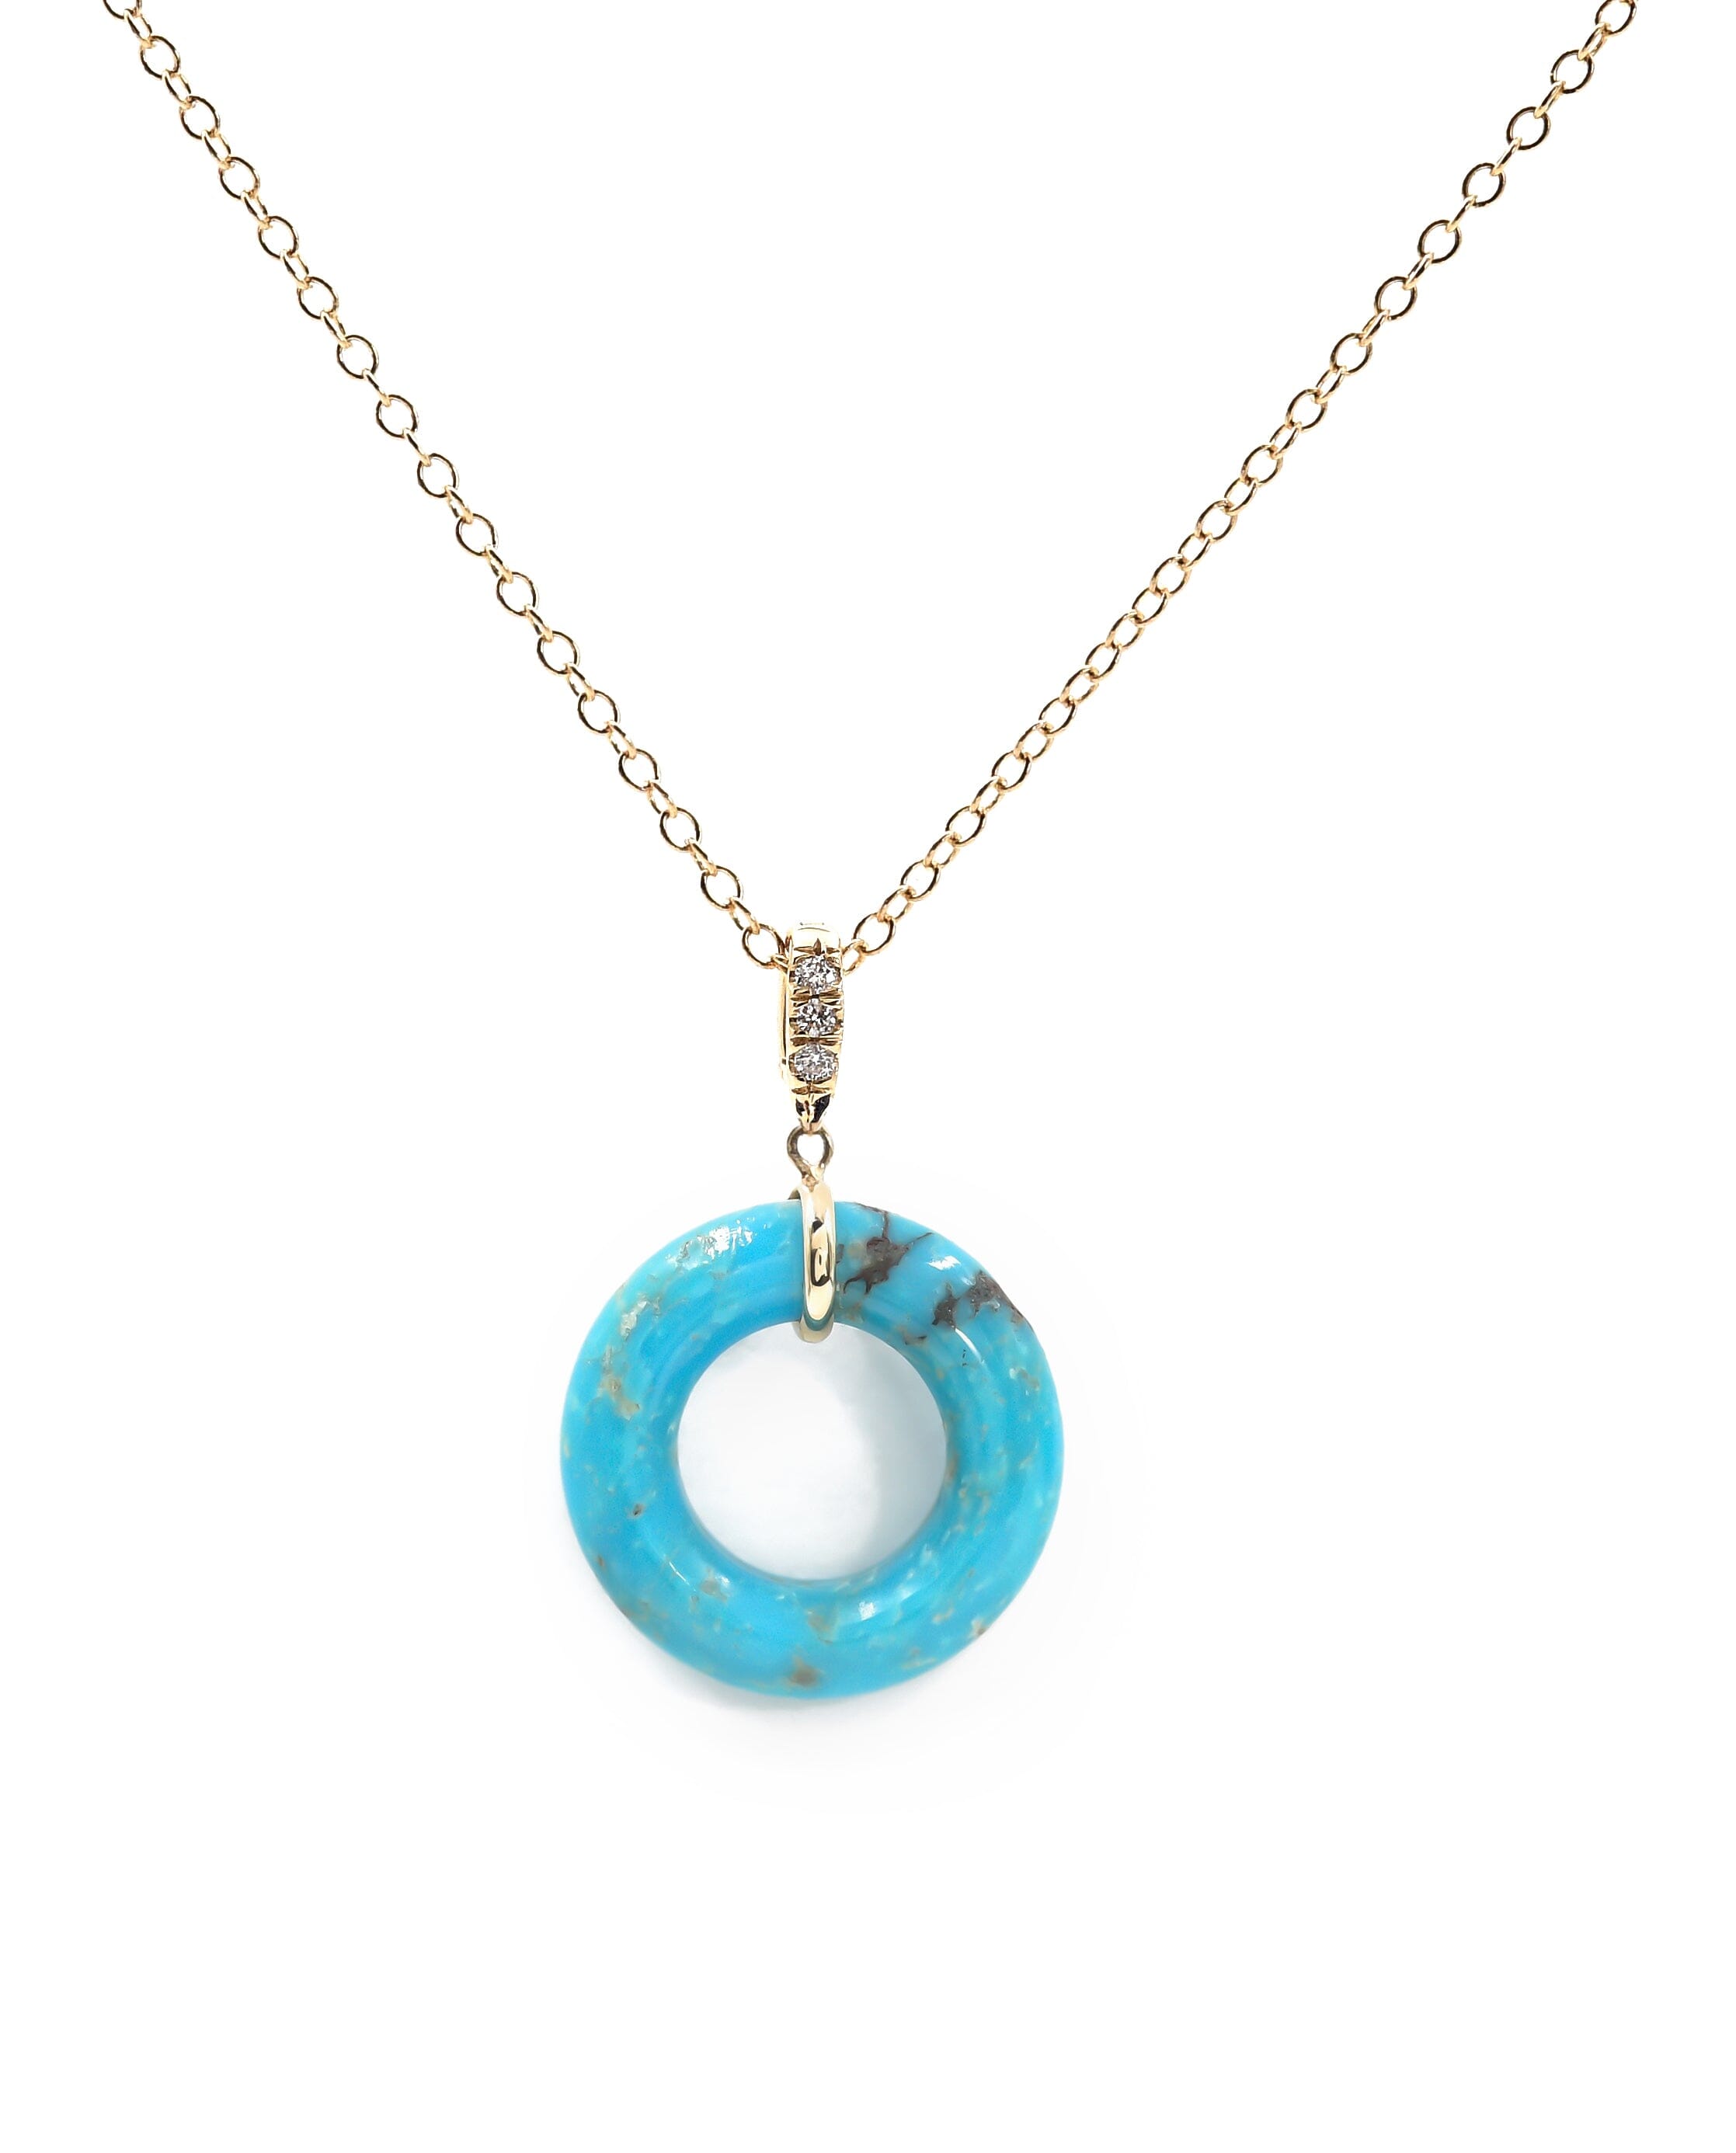 Cotton Candy Munchkin Cable Chain Necklace Necklaces - BONDEYE JEWELRY ®